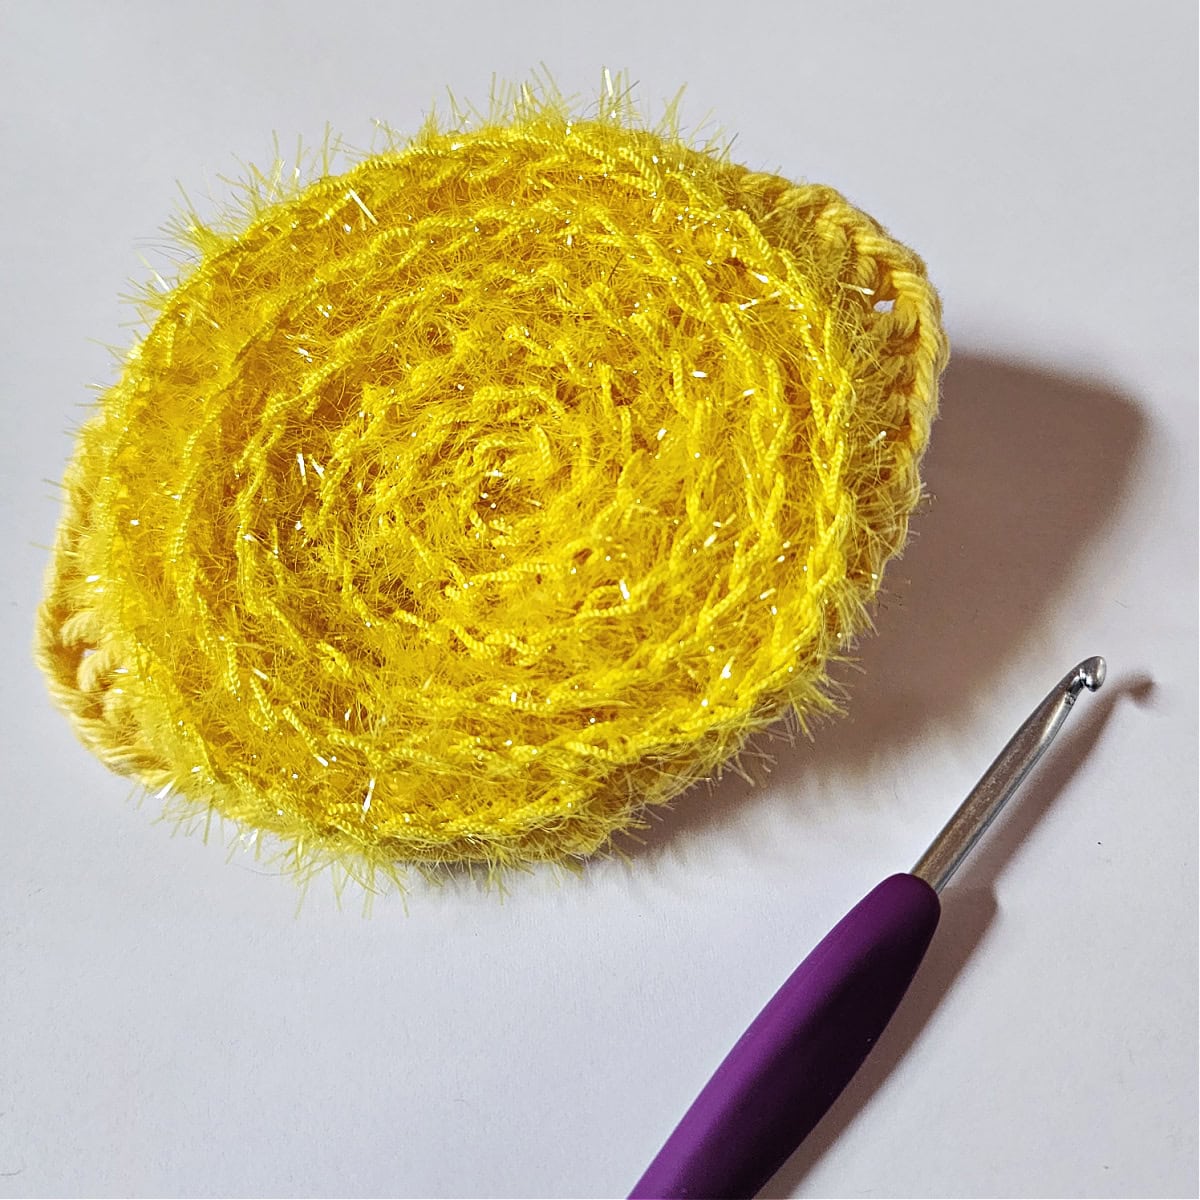 Crochet lemon with scrubby yarn added to the center of it and laying next to a purple 4.00 mm crochet hook.